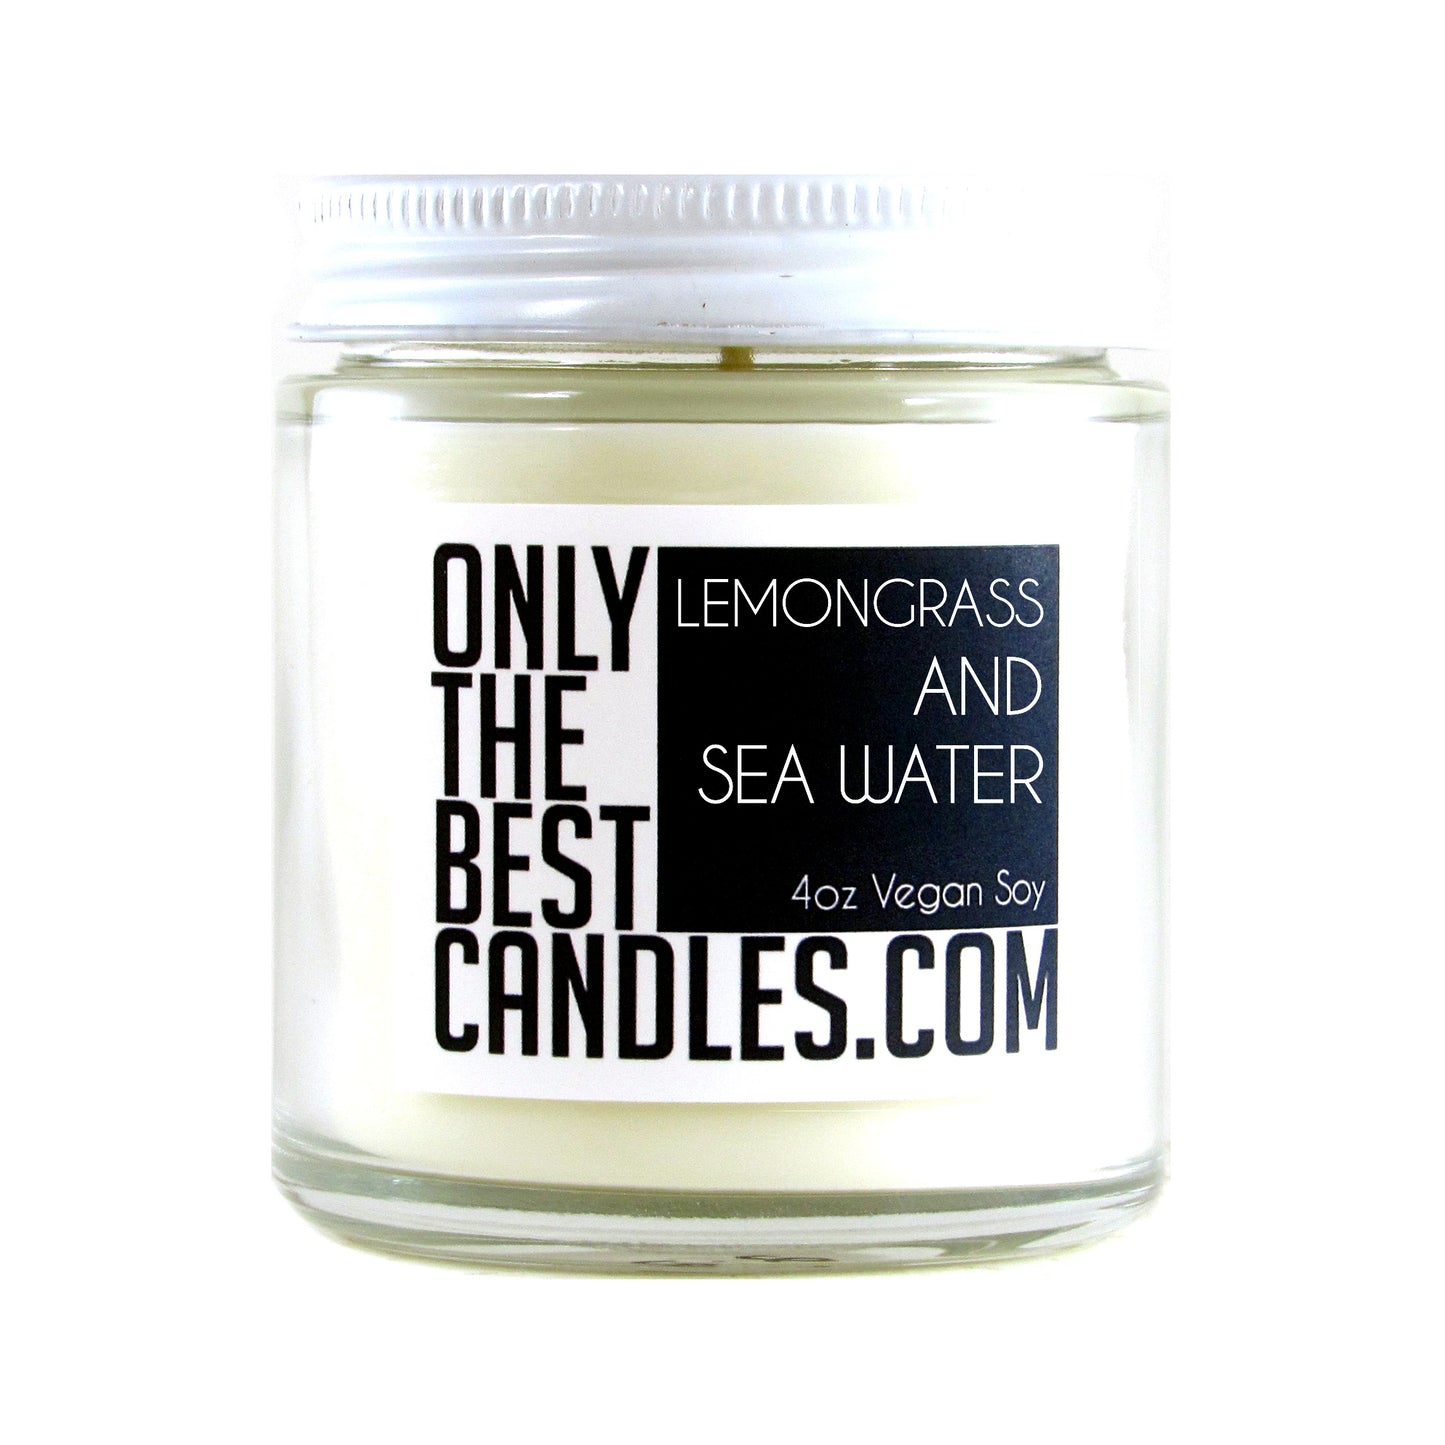 Lemongrass and Sea Water 4oz Candle